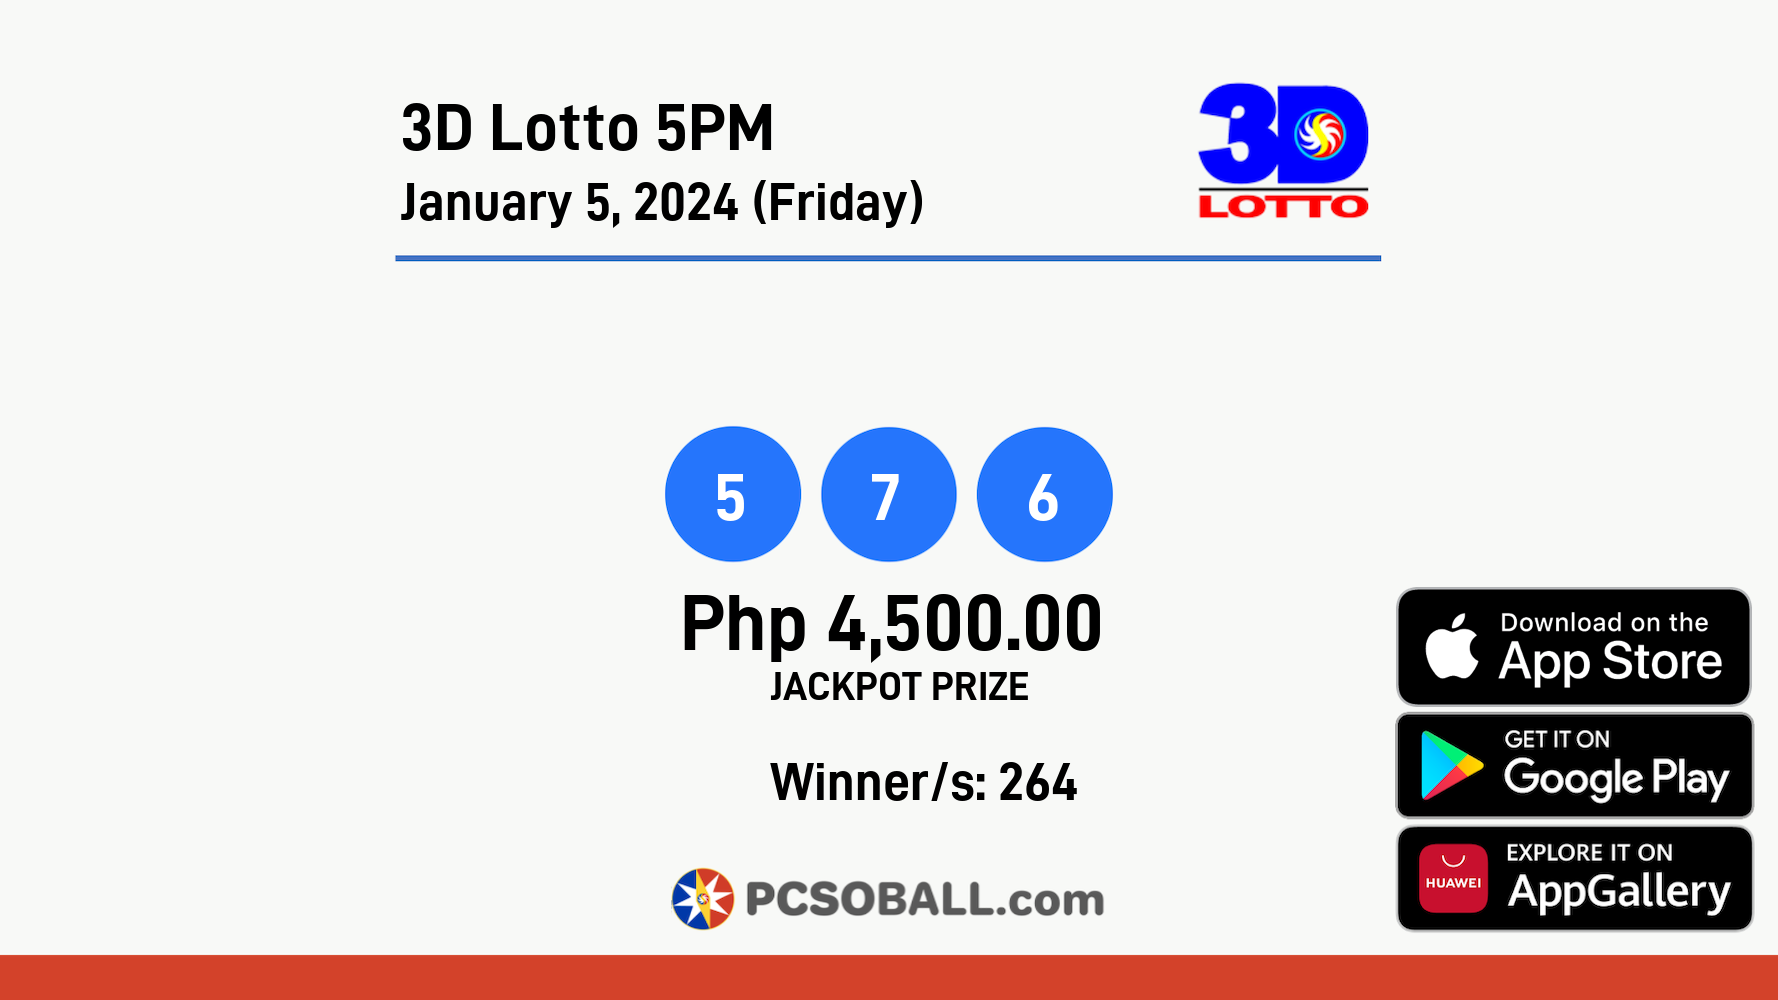 3D Lotto 5PM January 5, 2024 (Friday) Result